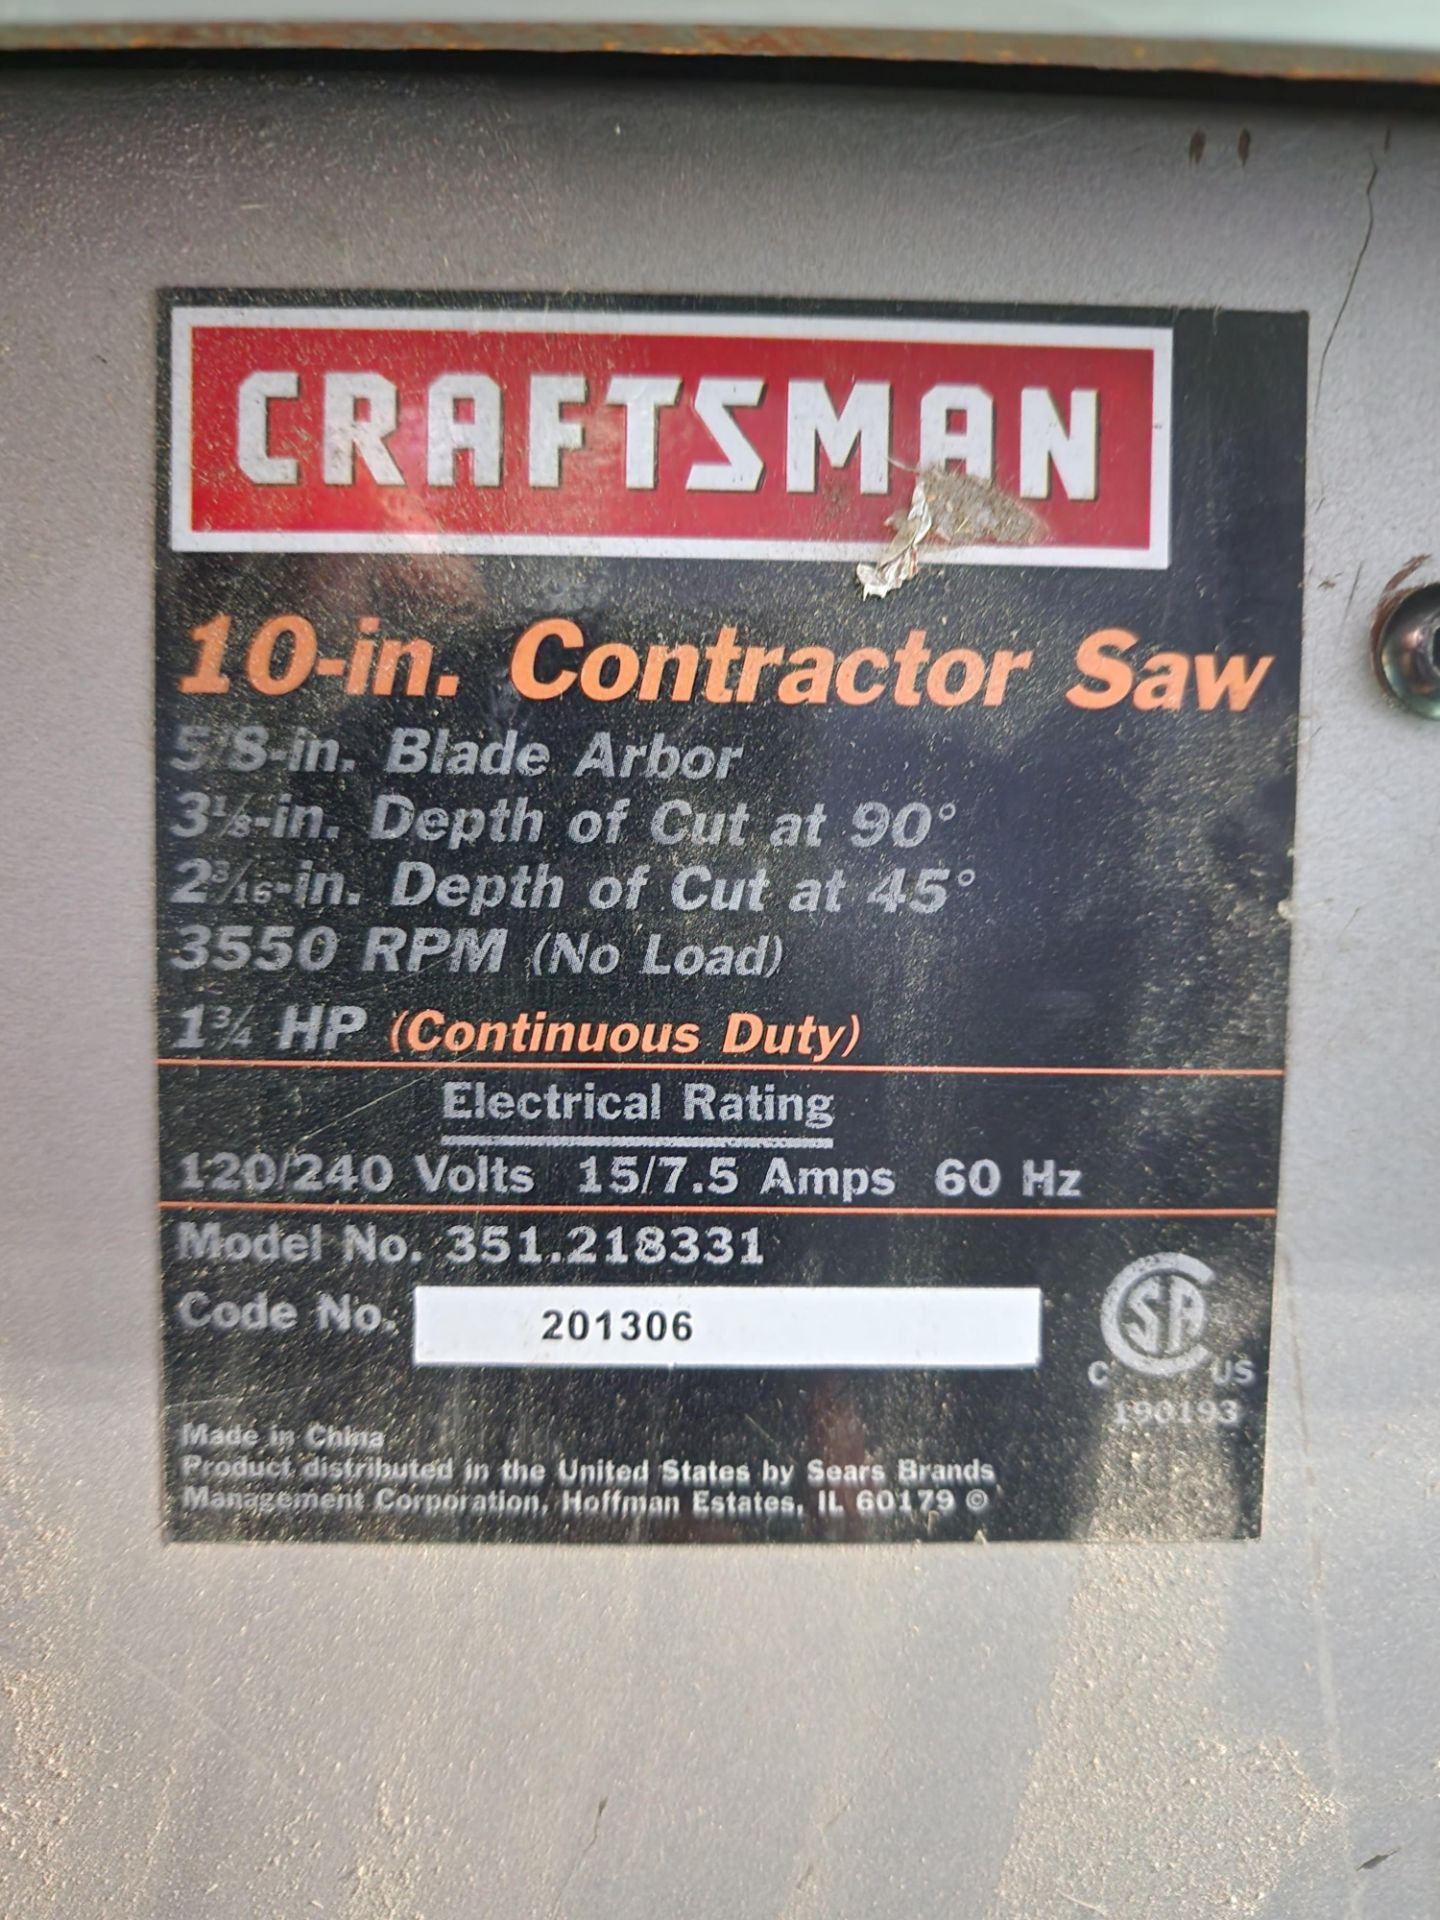 Craftsman Model 351.218331 10" Table Saw, S/N 201306 (2013) - Image 9 of 9